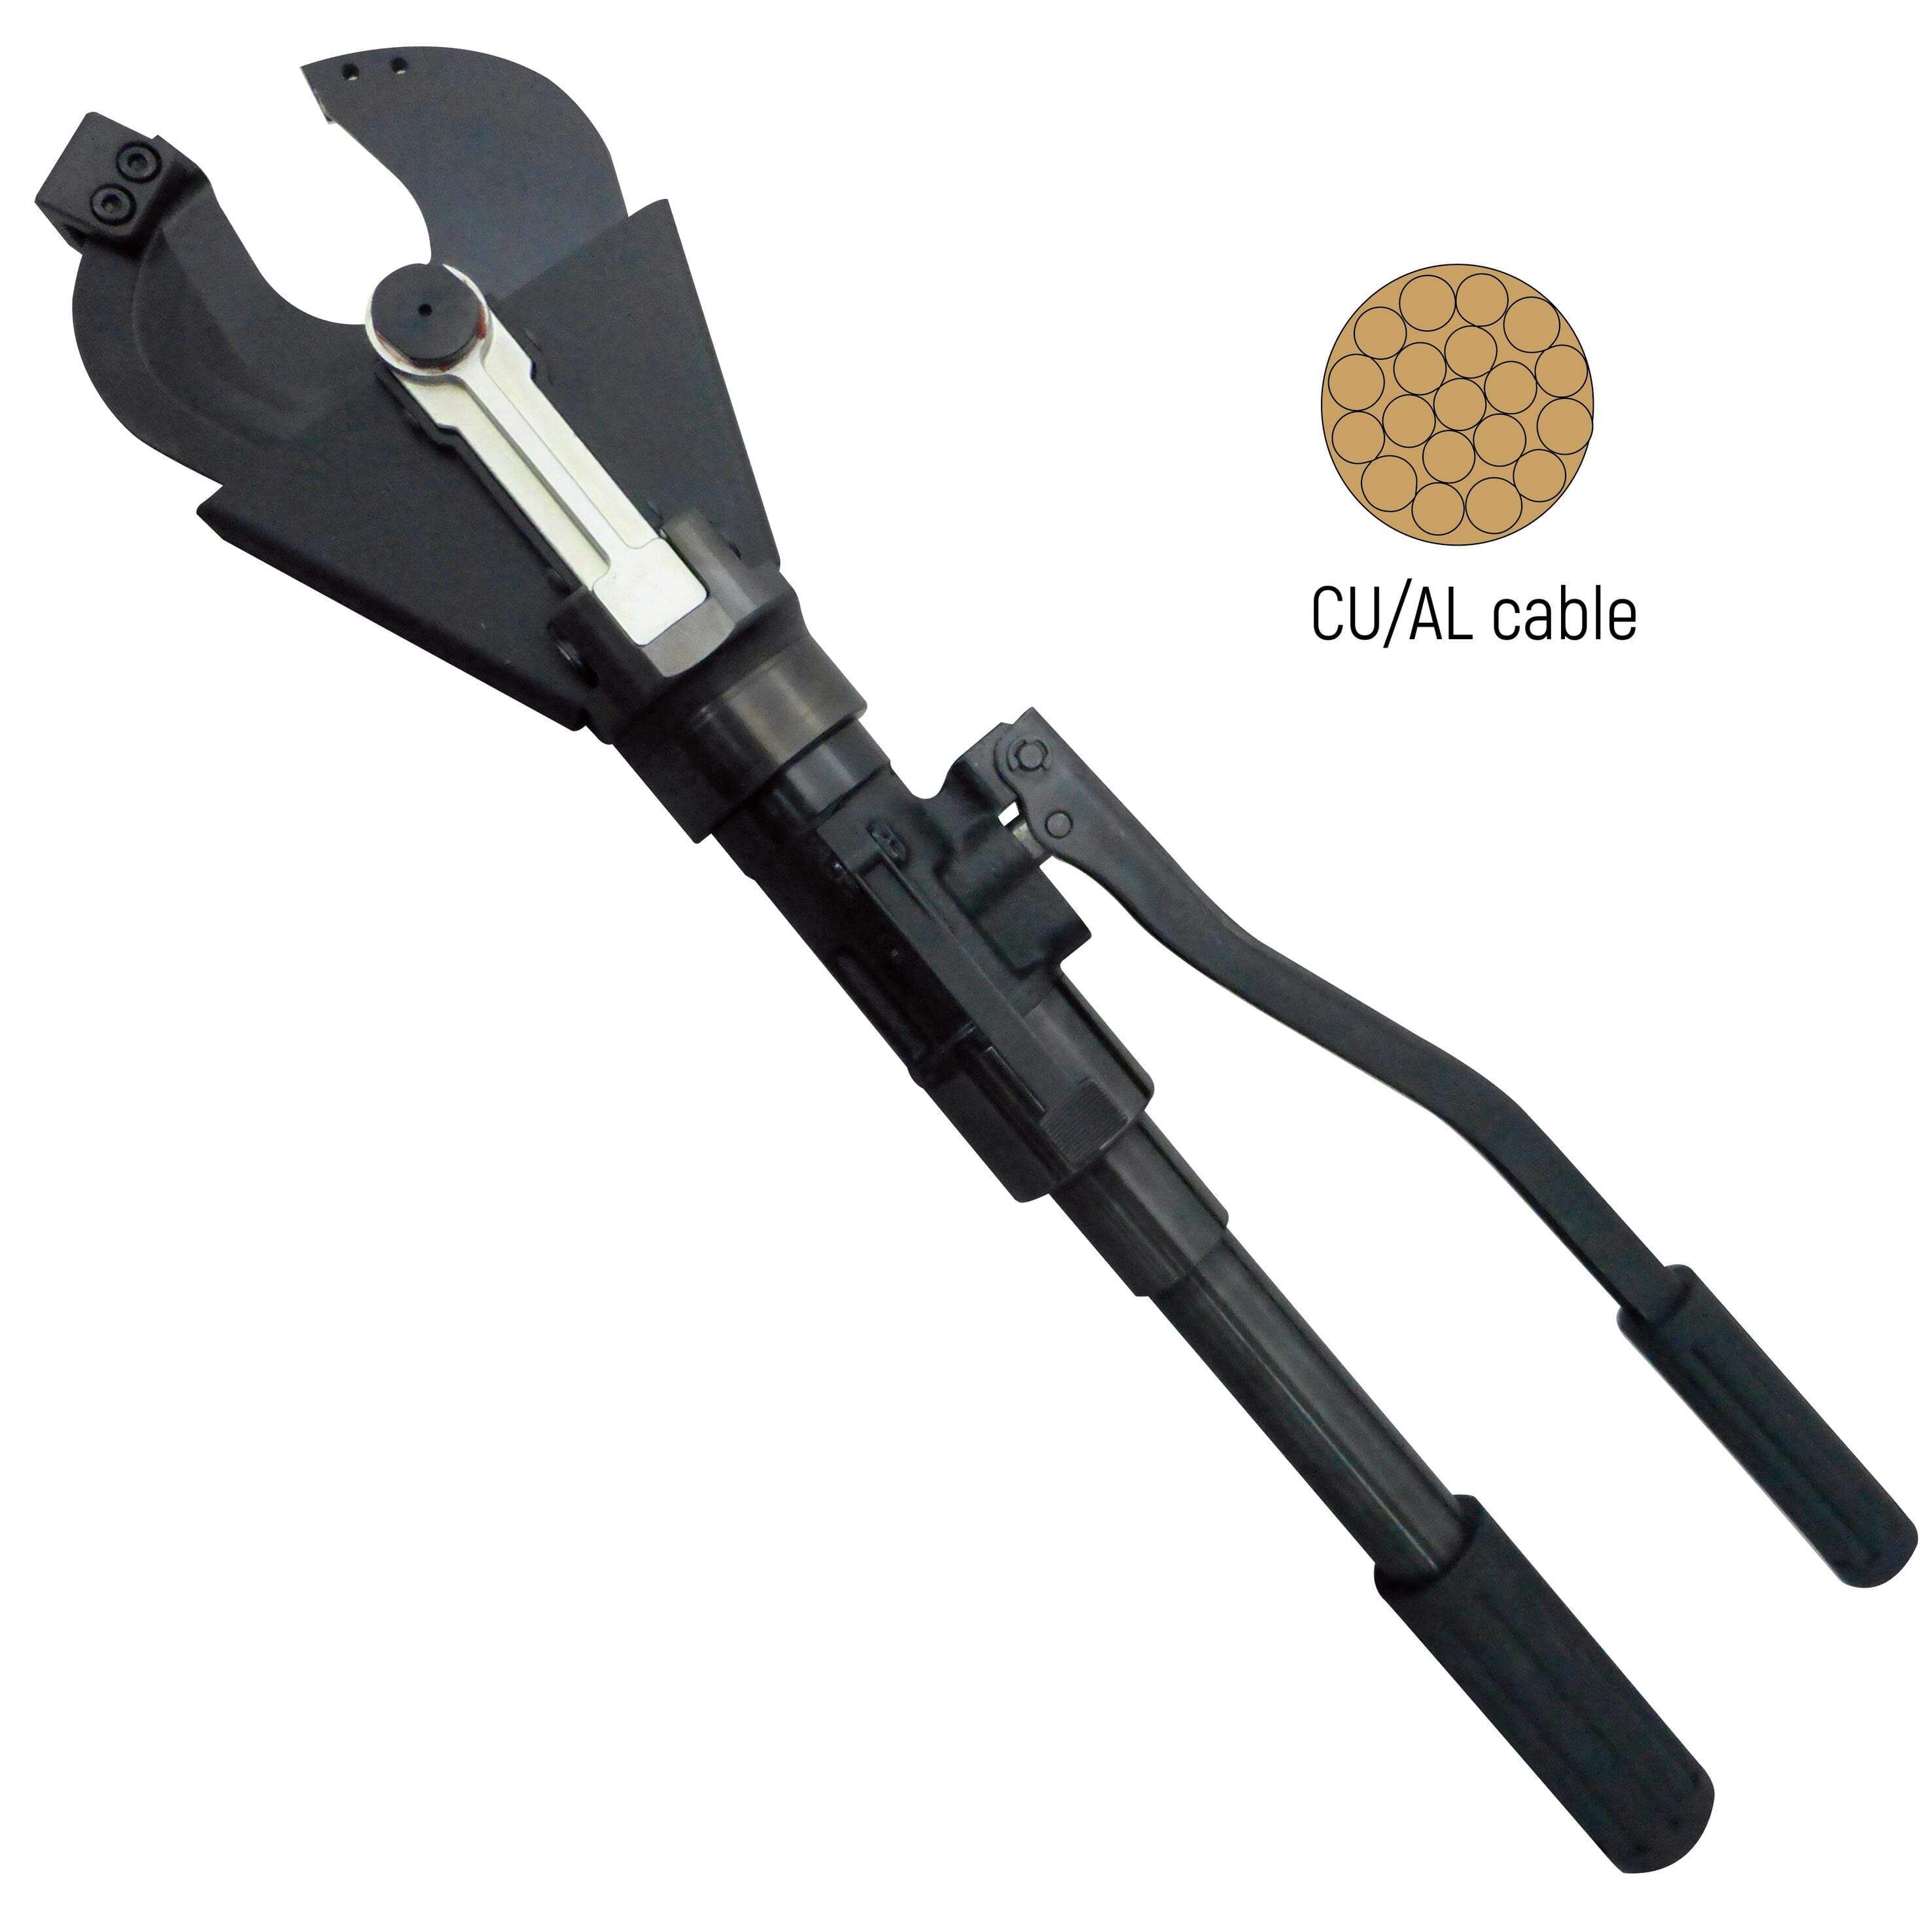 S-50Y MANUAL HYDRAULIC CABLE CUTTERS